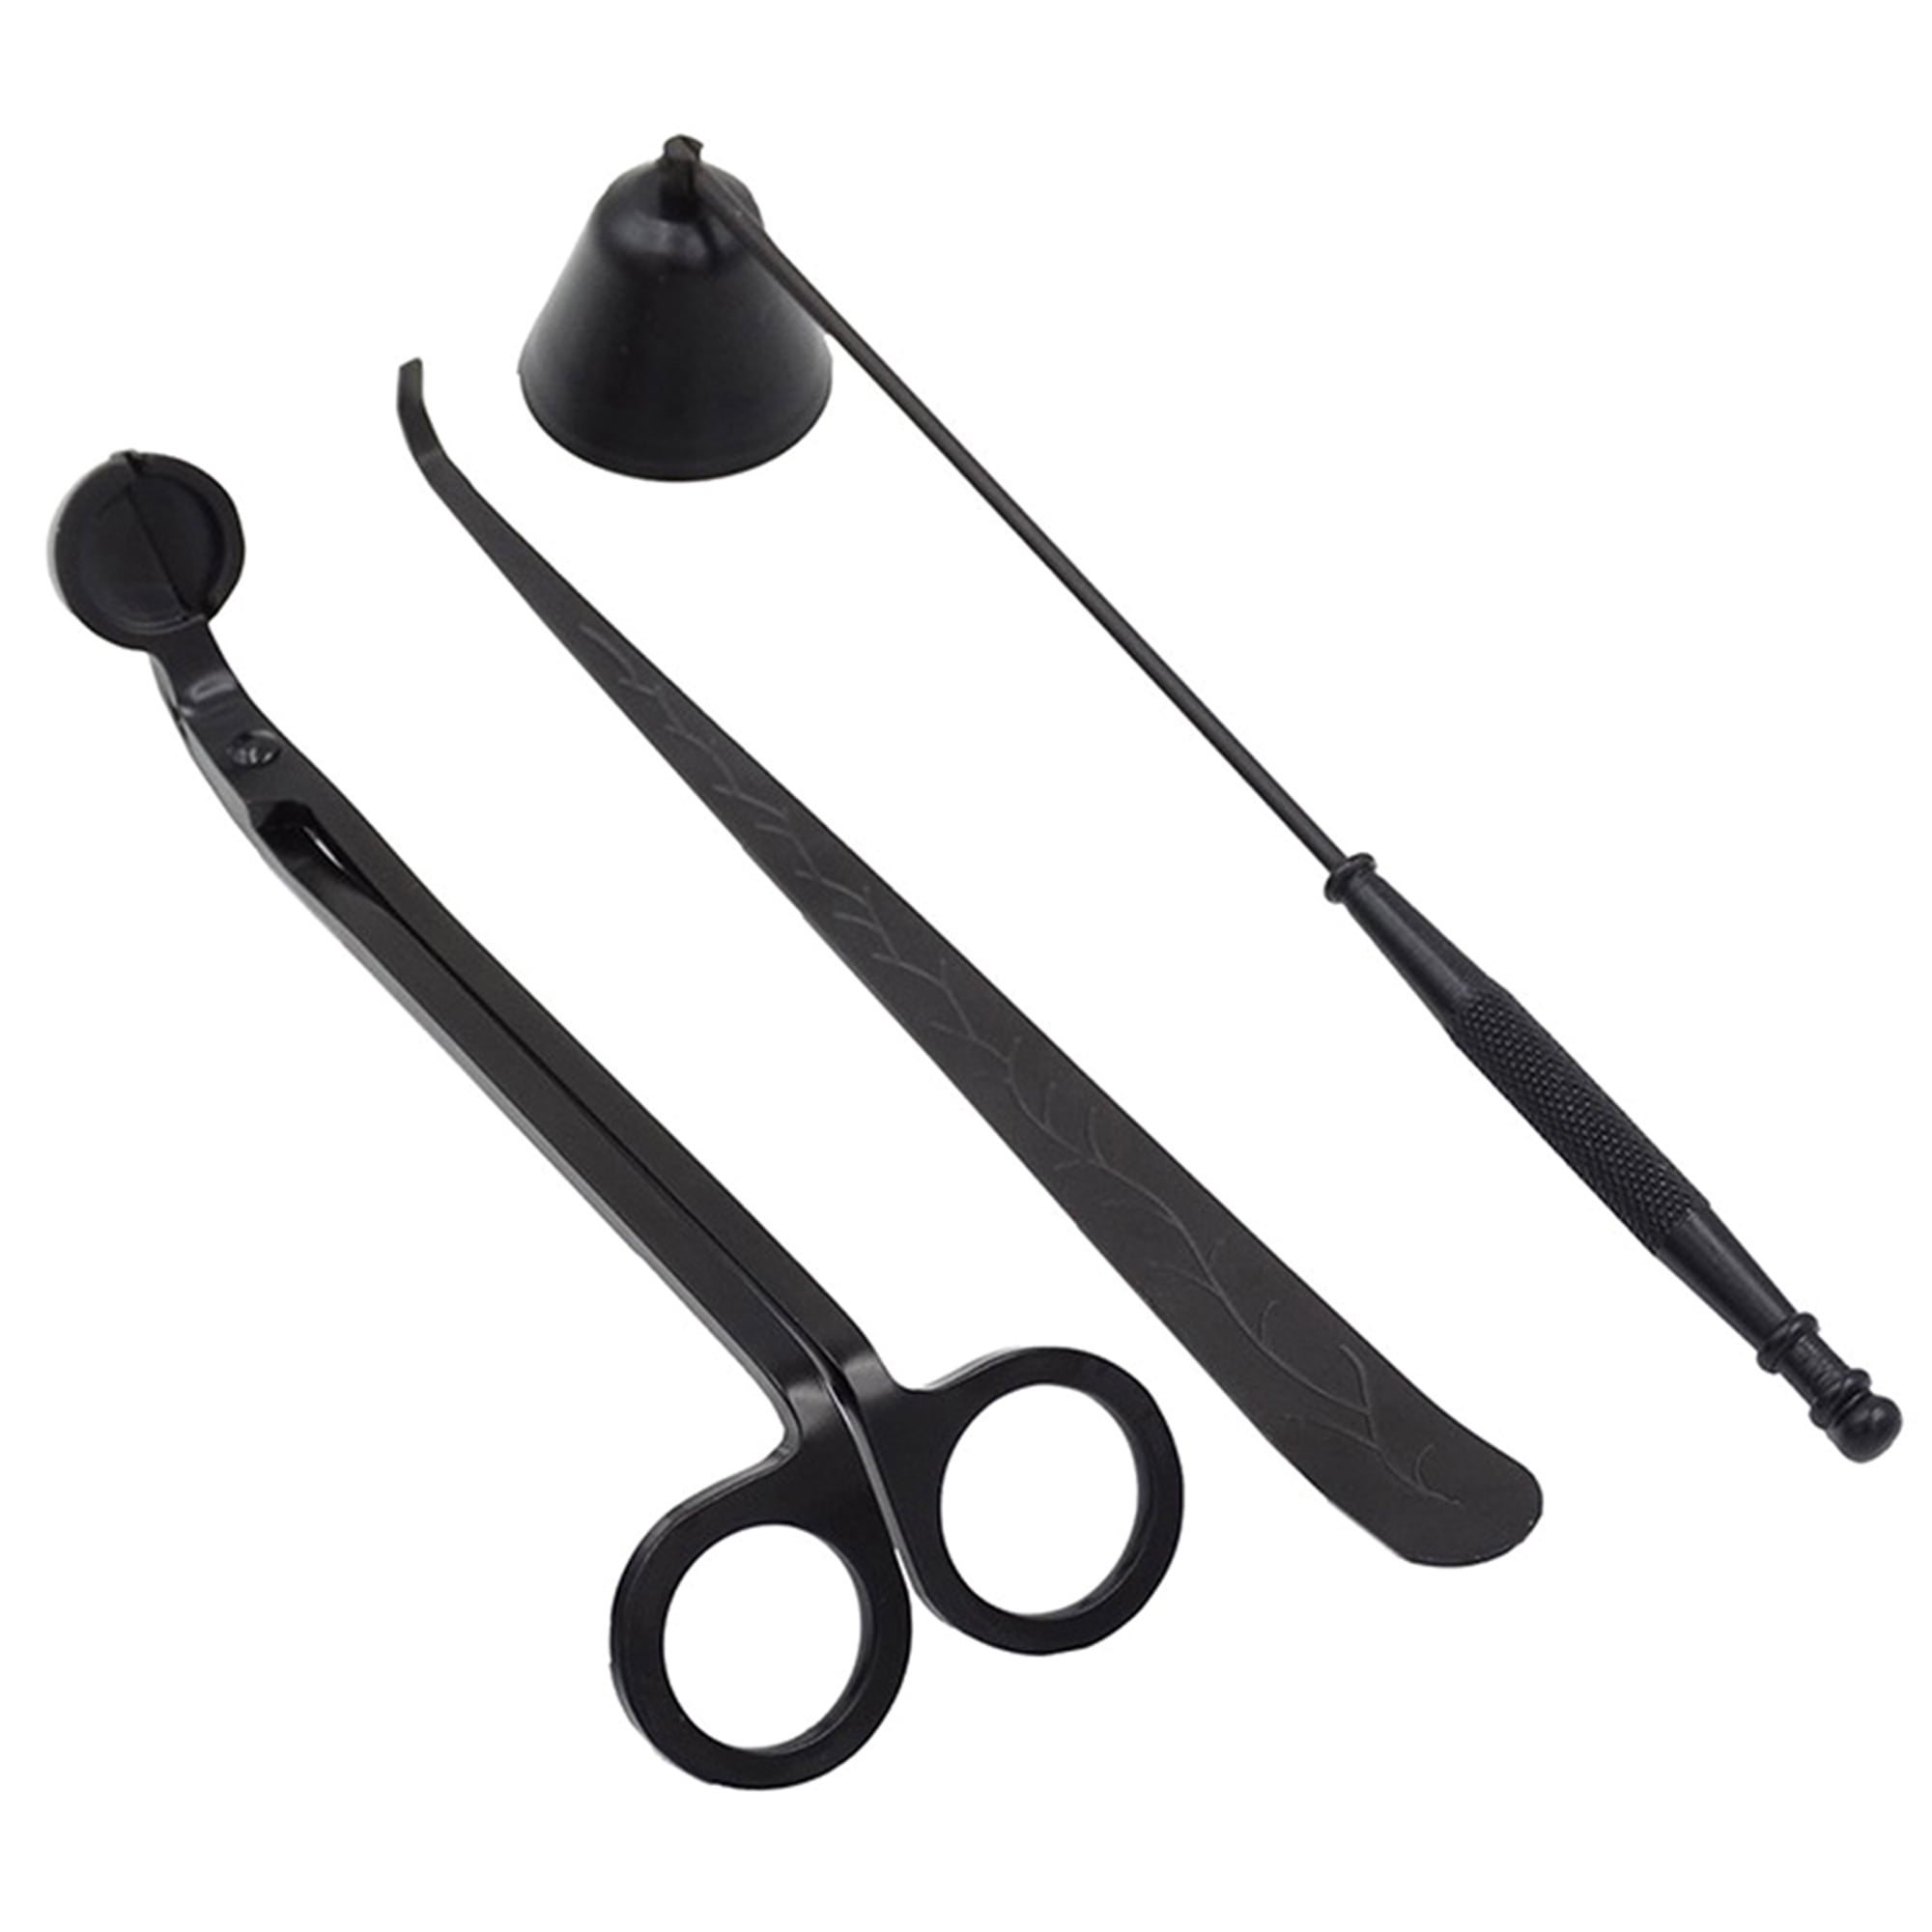 Famgee Candle Snuffer Candle Wick Trimmer Wick Dipper 3 in 1 Candle Accessory Set Black